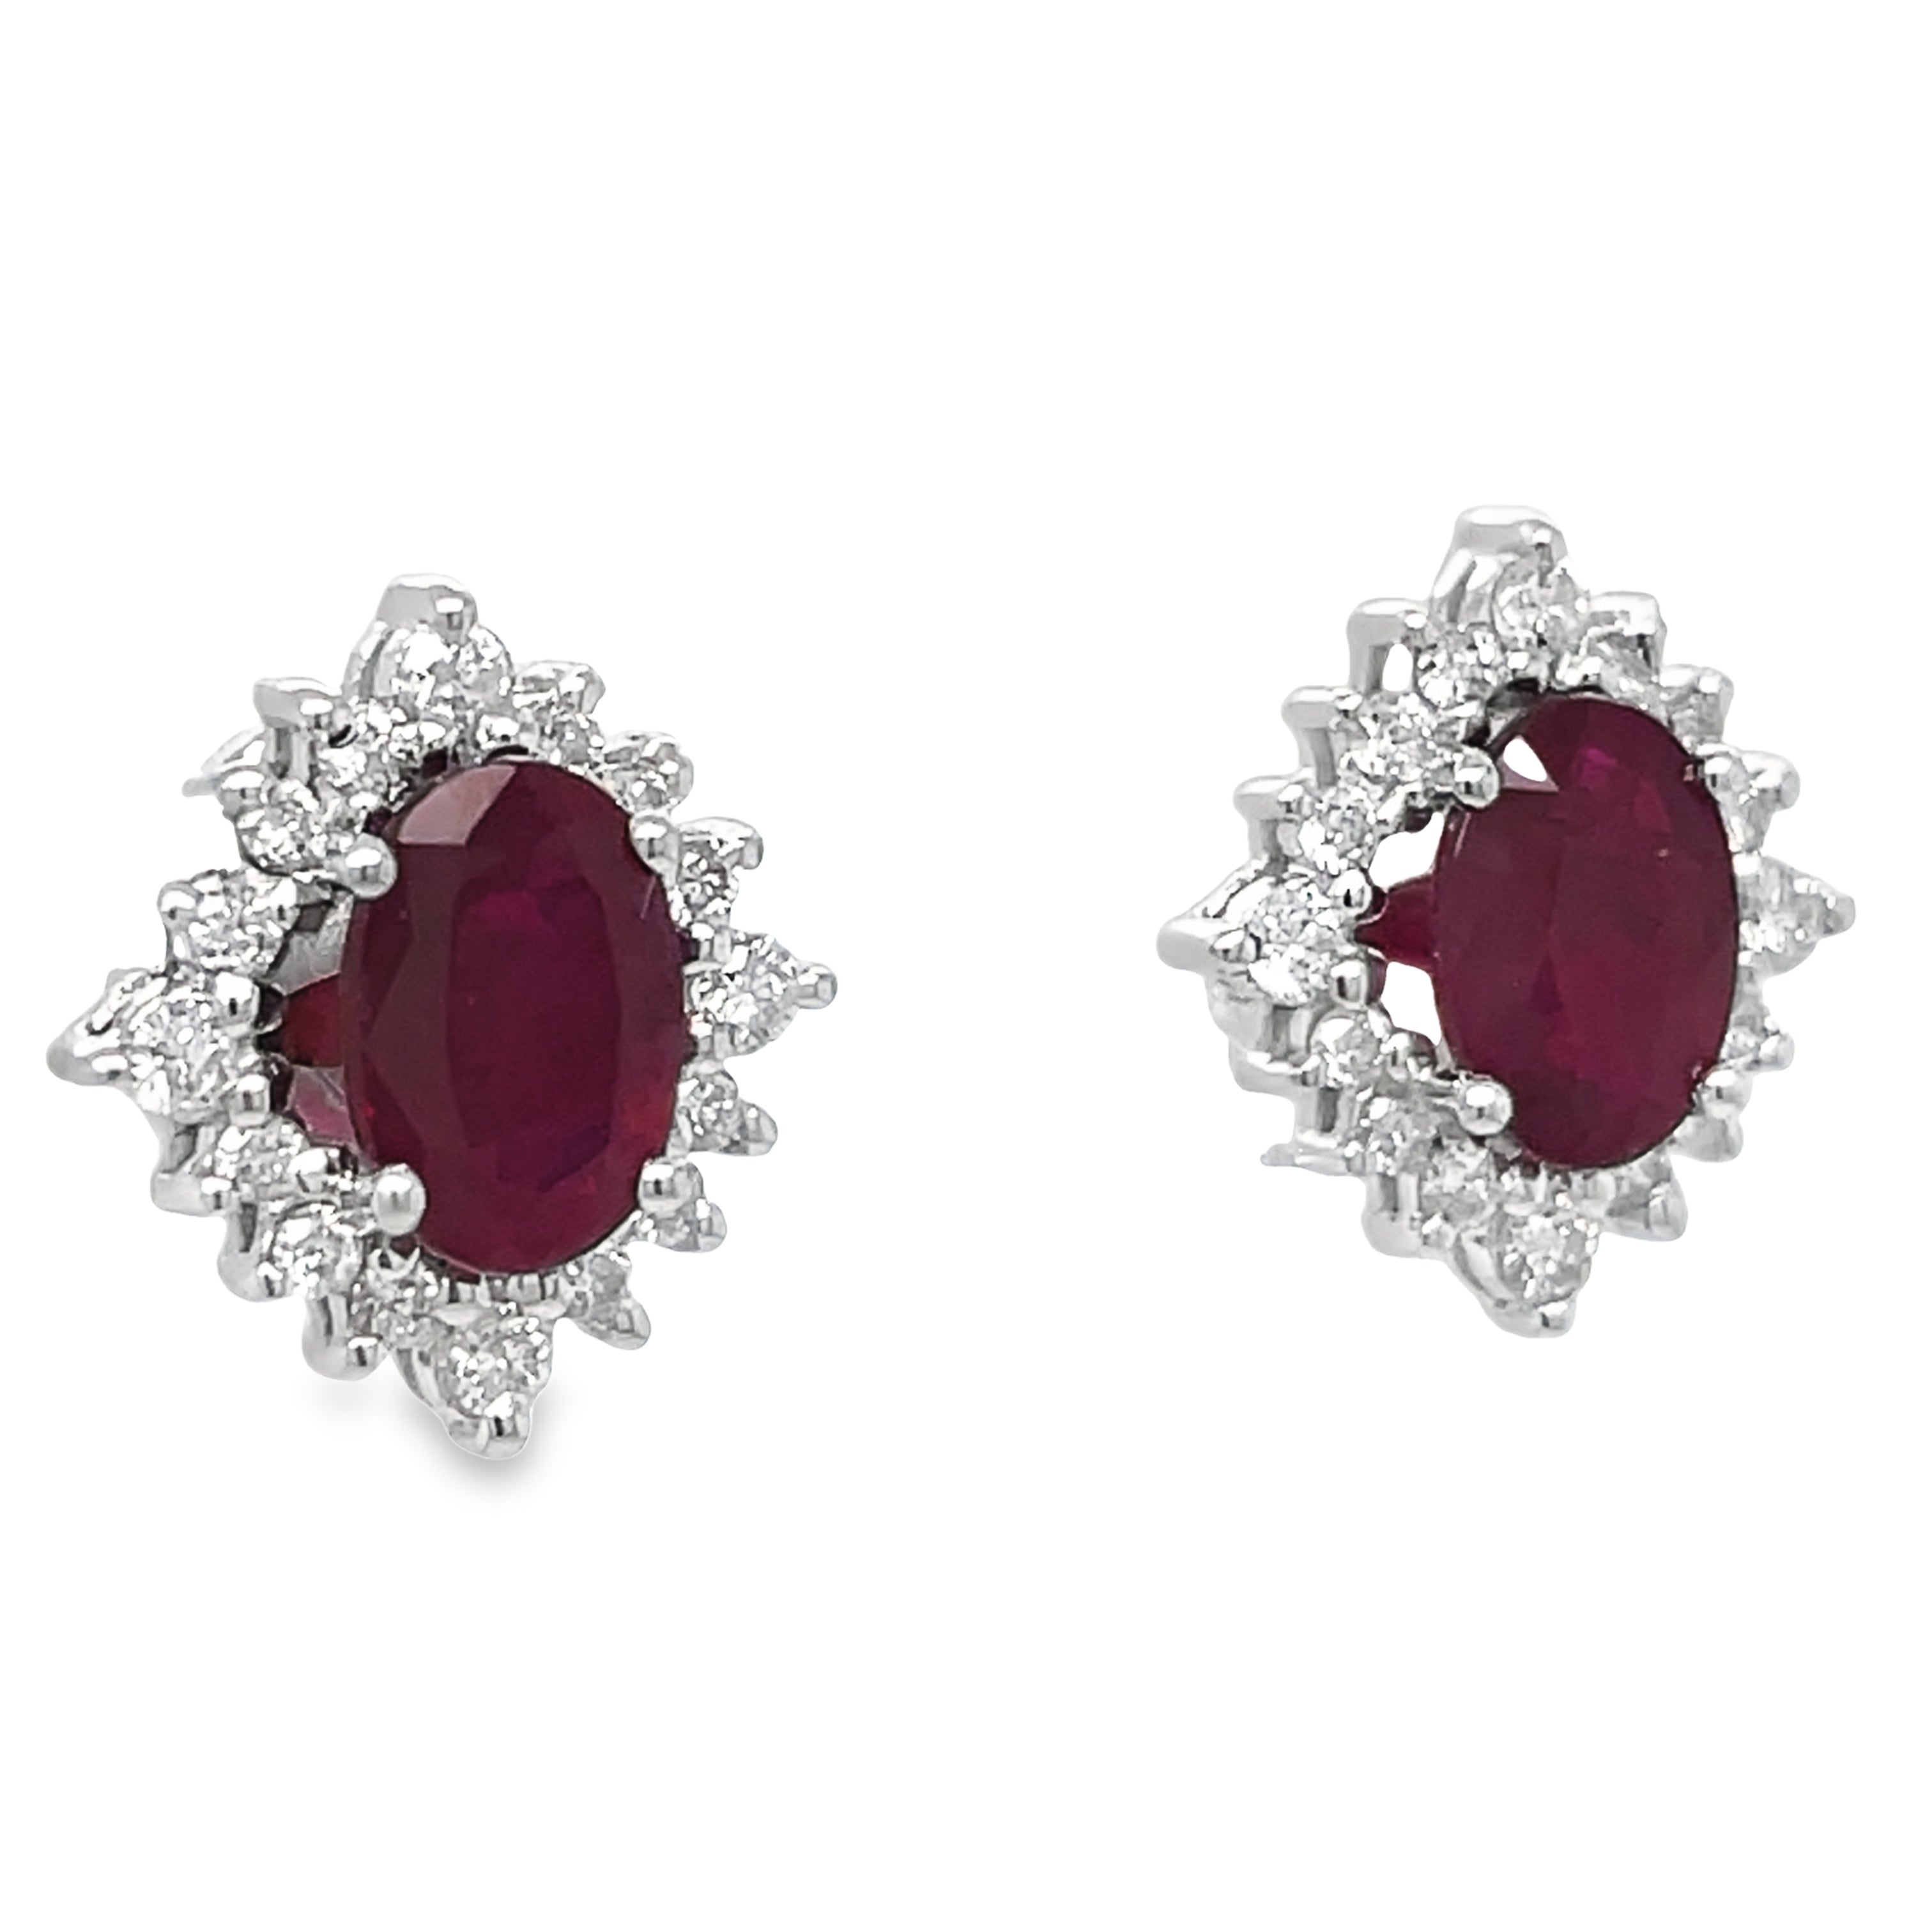 These elegant earrings feature oval-shaped rubies and round diamonds, set in 18k white gold. Measuring 12.00 x 10.00 mm, they make a stunning addition to any jewelry collection. The rubies add a touch of color while the diamonds bring a brilliant sparkle, making these earrings perfect for any occasion.